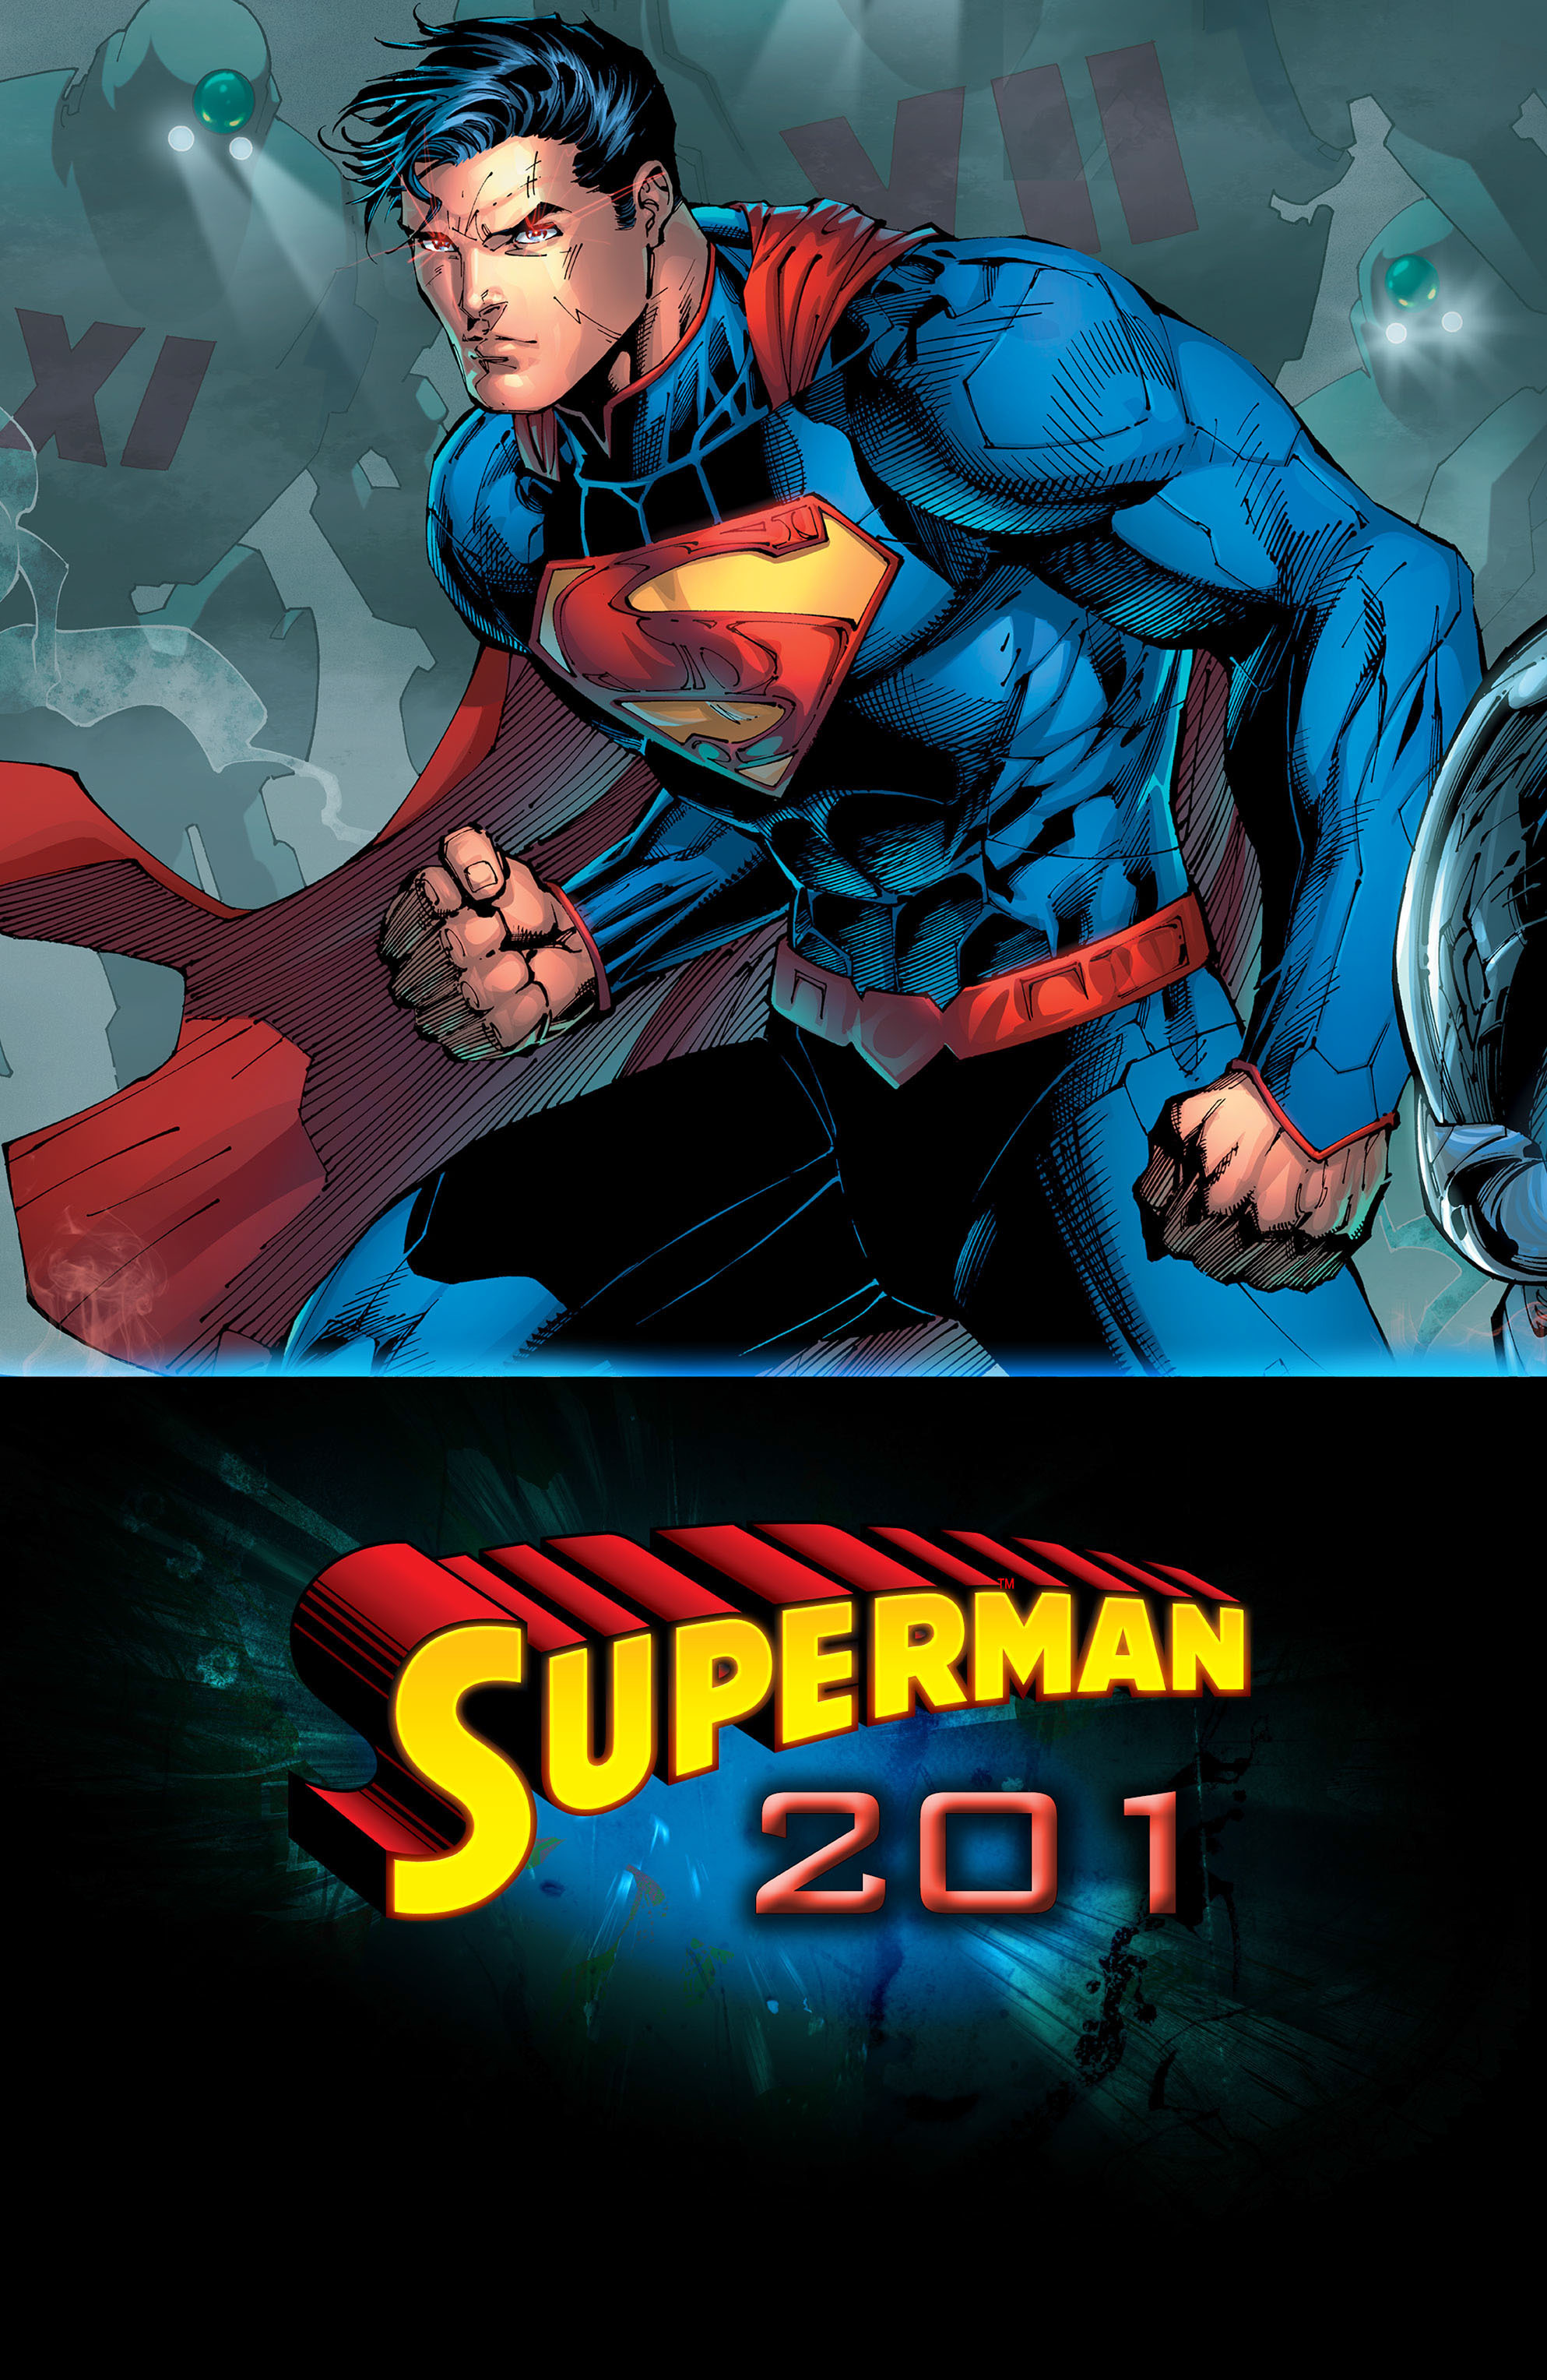 Read online Superman (2011) comic -  Issue # _Special - Superman 201 - 1